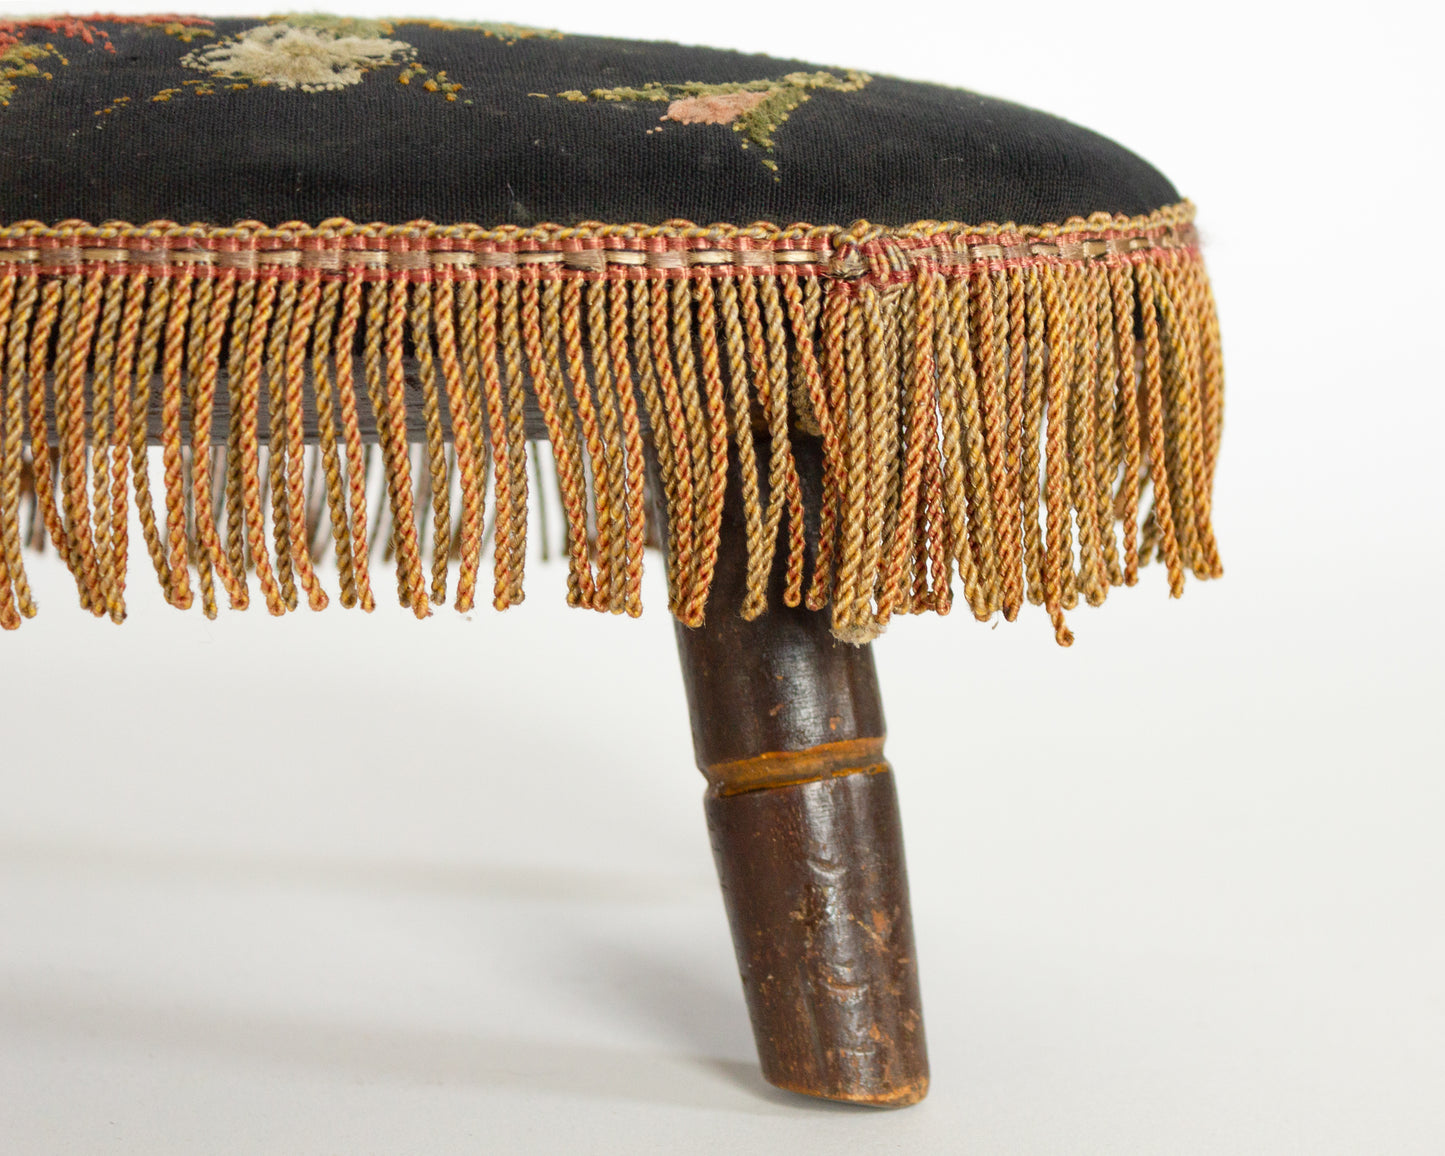 Crewelwork covered windsor stool